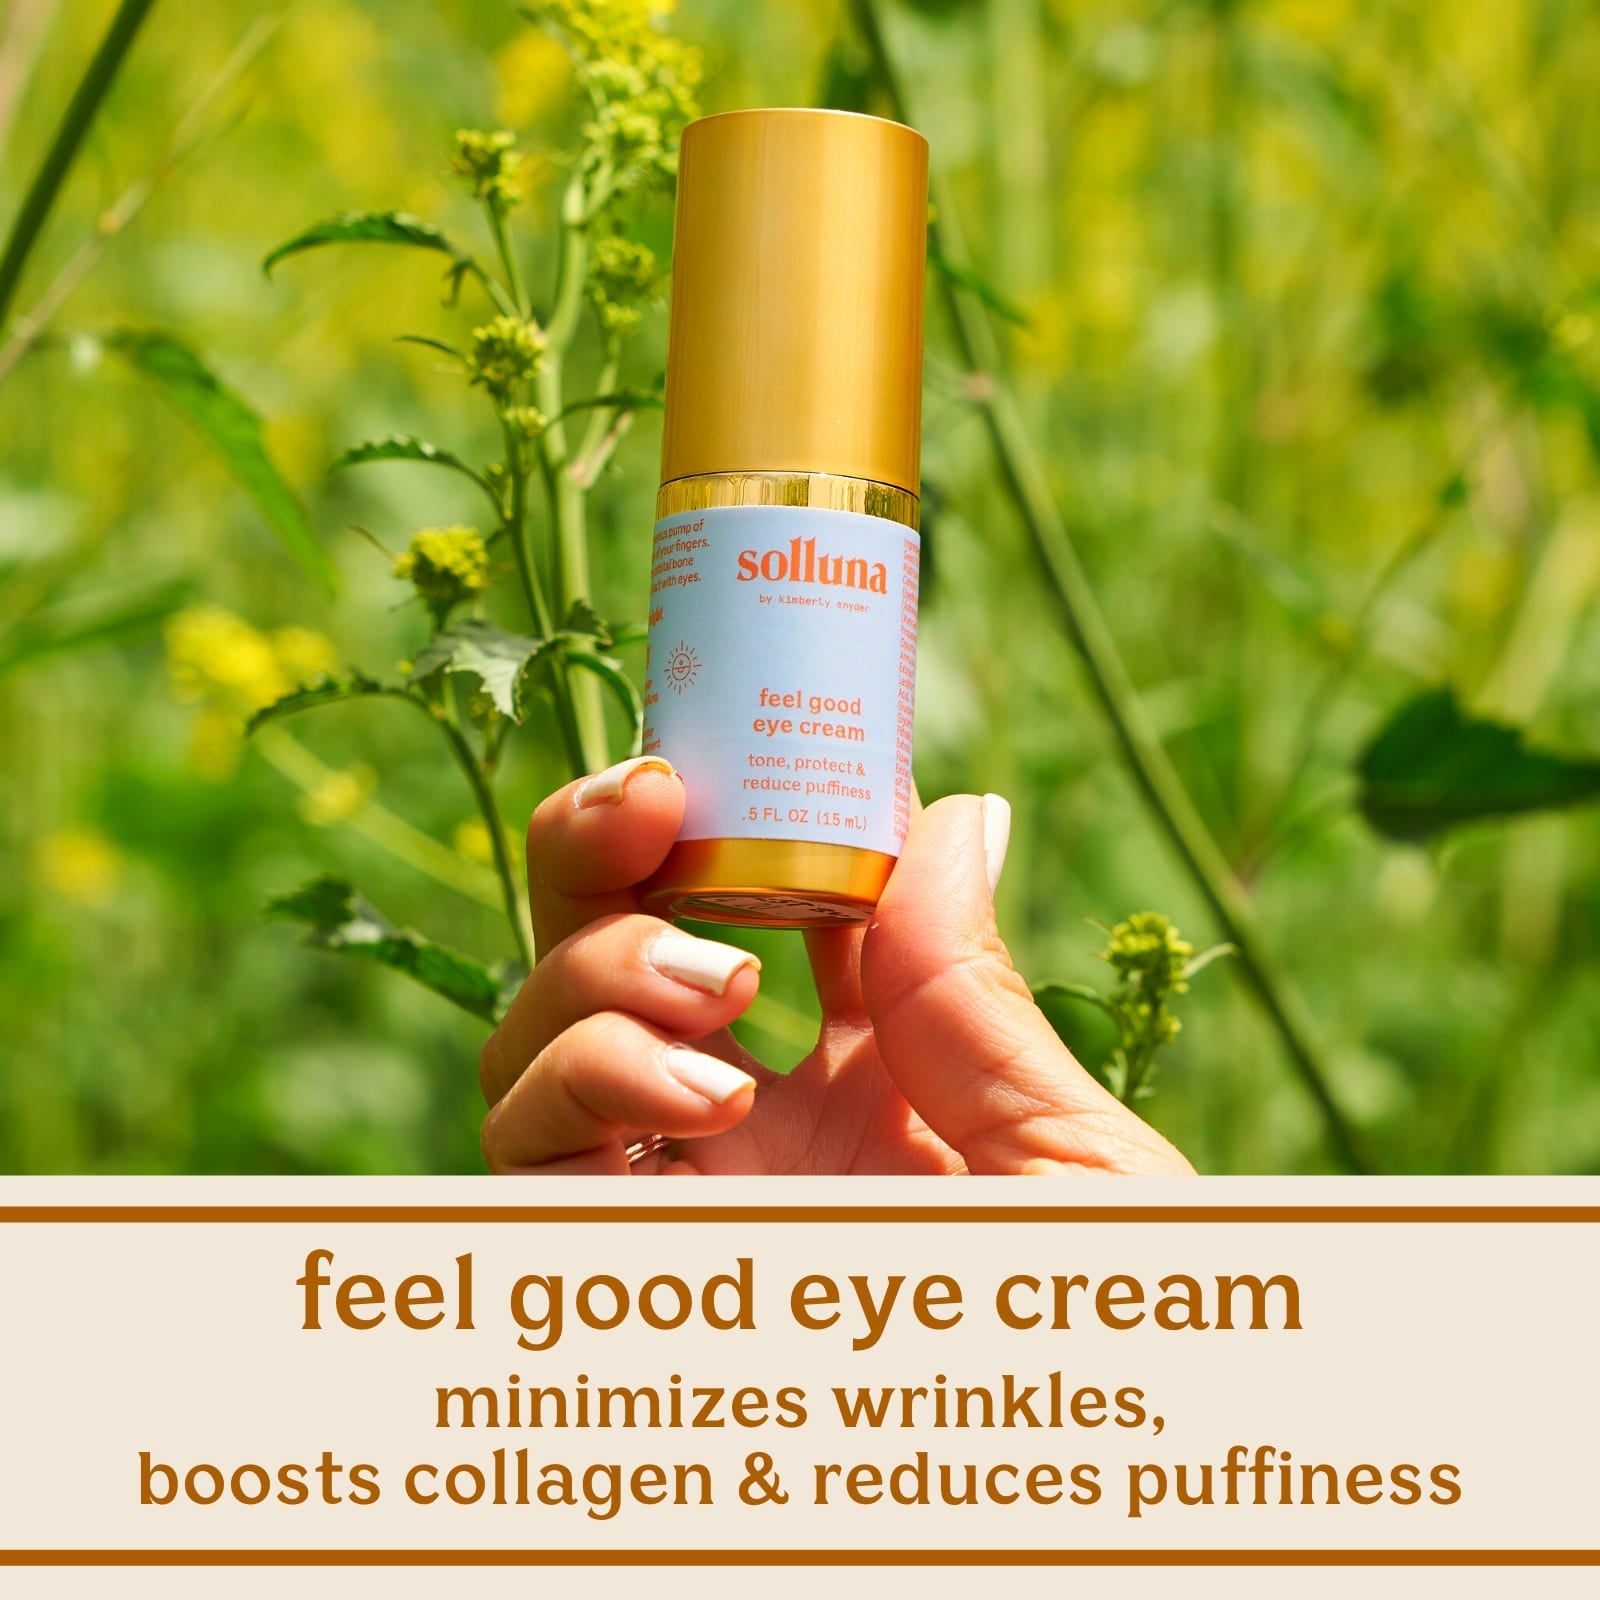 Solluna's Feel Good Eye Cream Minimizes Wrinkles, Boosts Collagen & Reduces Puffiness